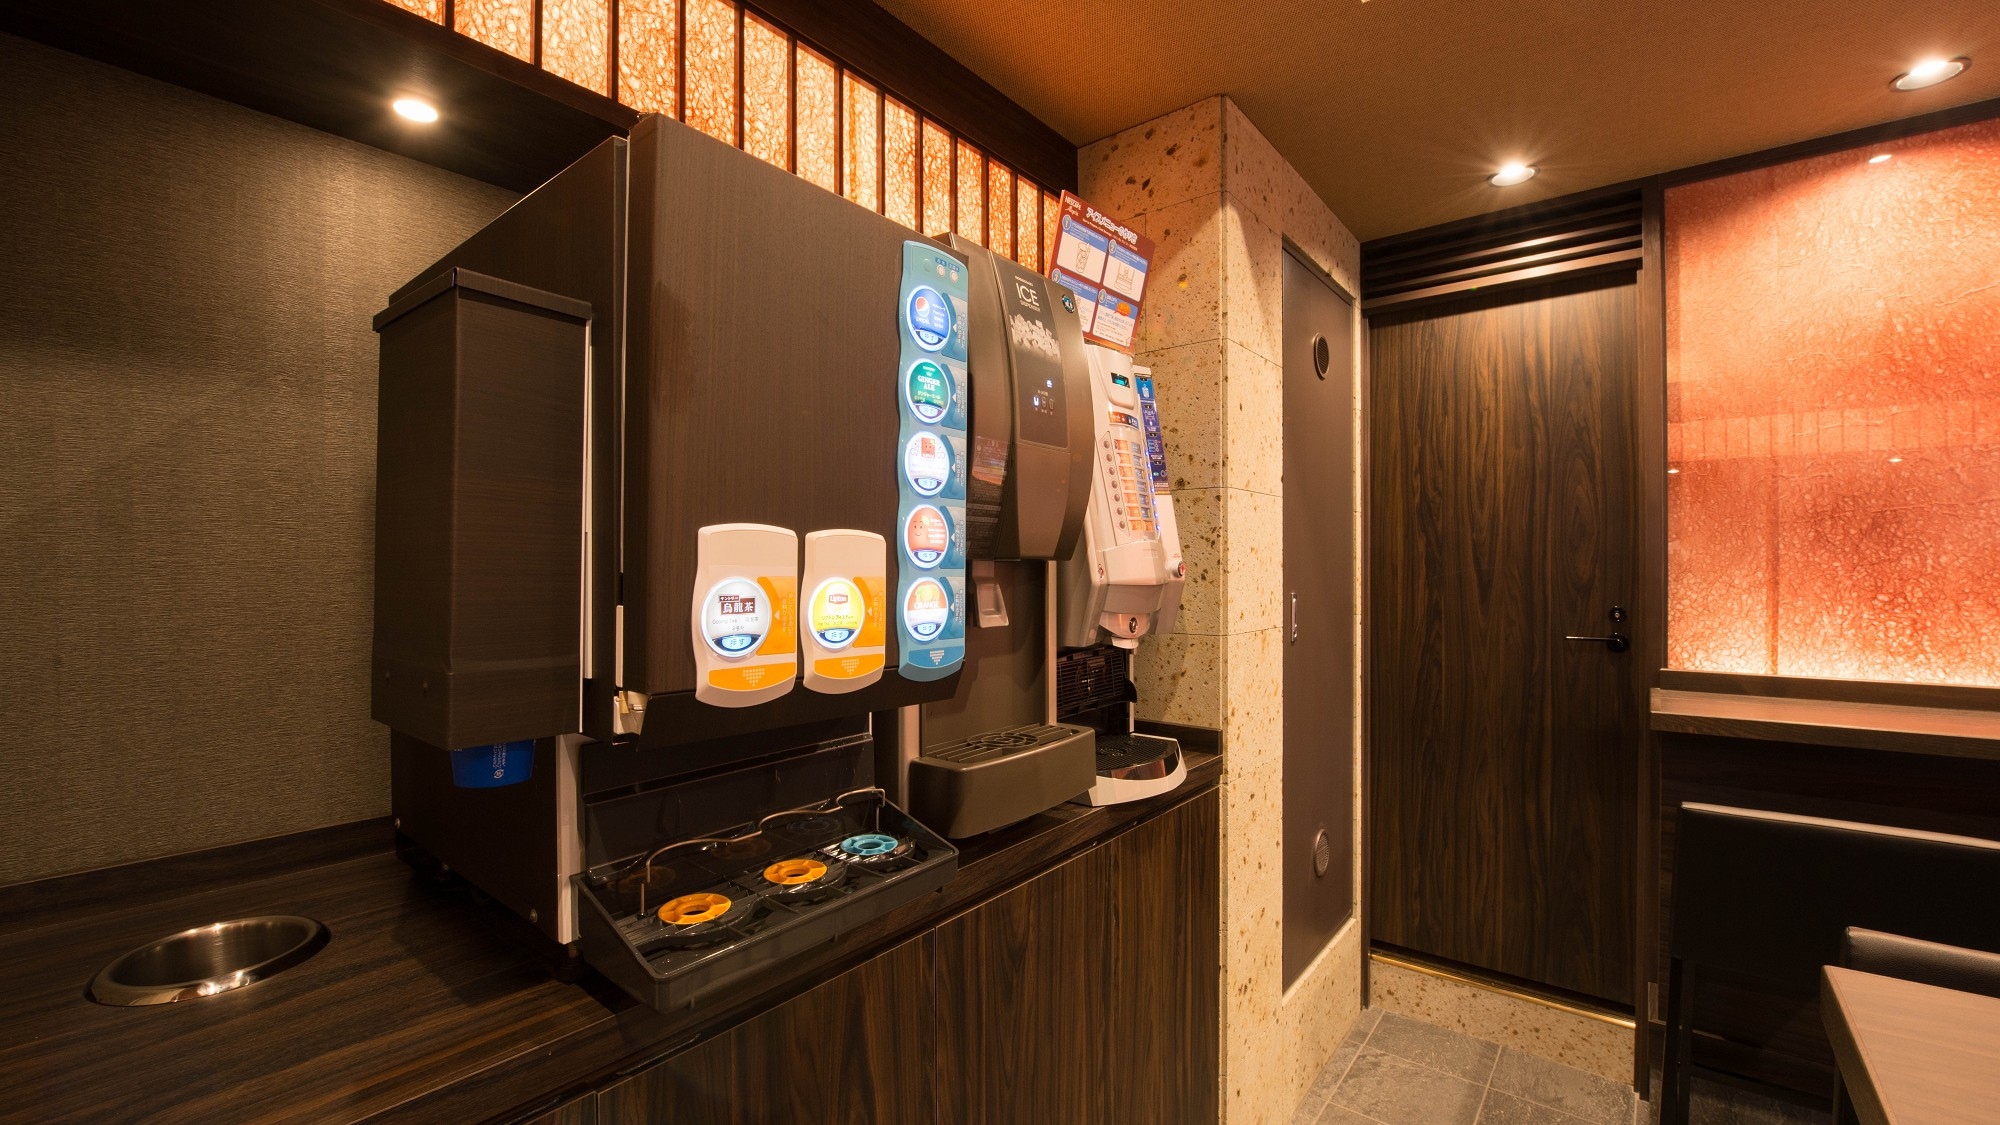 [Free drink bar] You can drink coffee and juice freely.